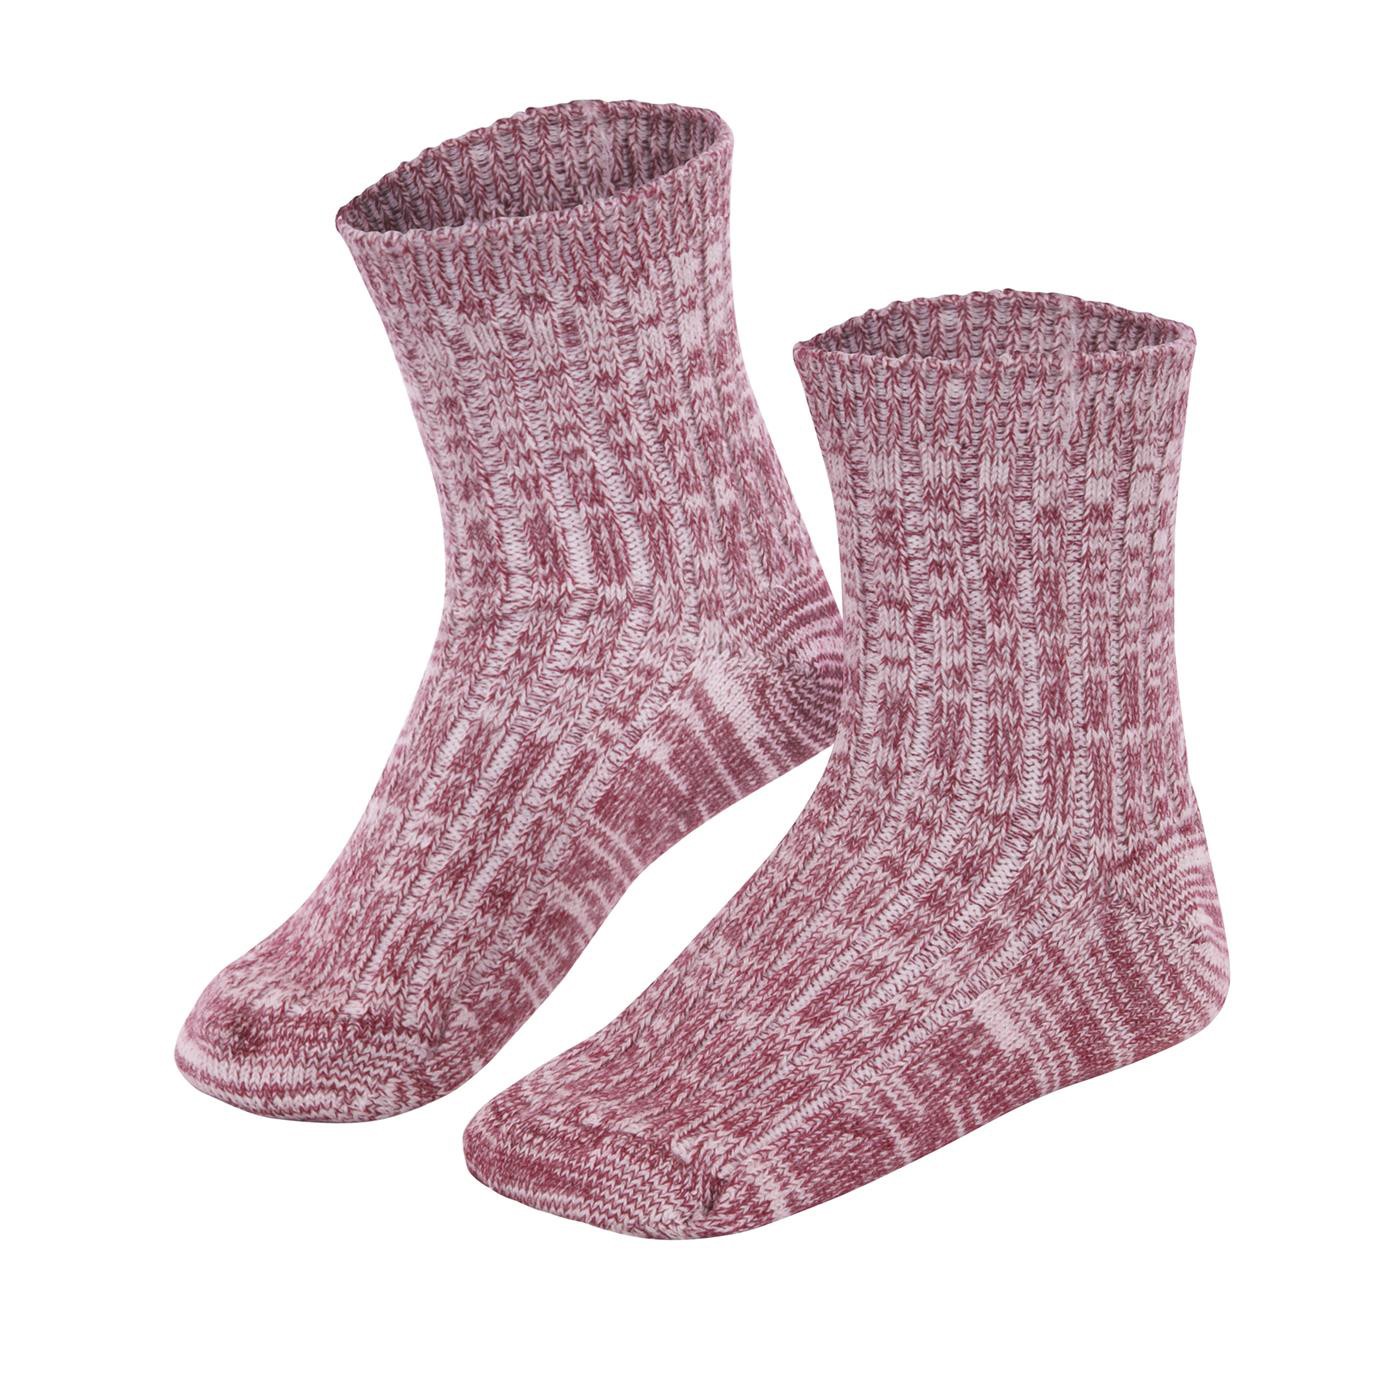 Children's Thermal Ribbed Socks in Wool & Cotton [3836] - £8.60 ...